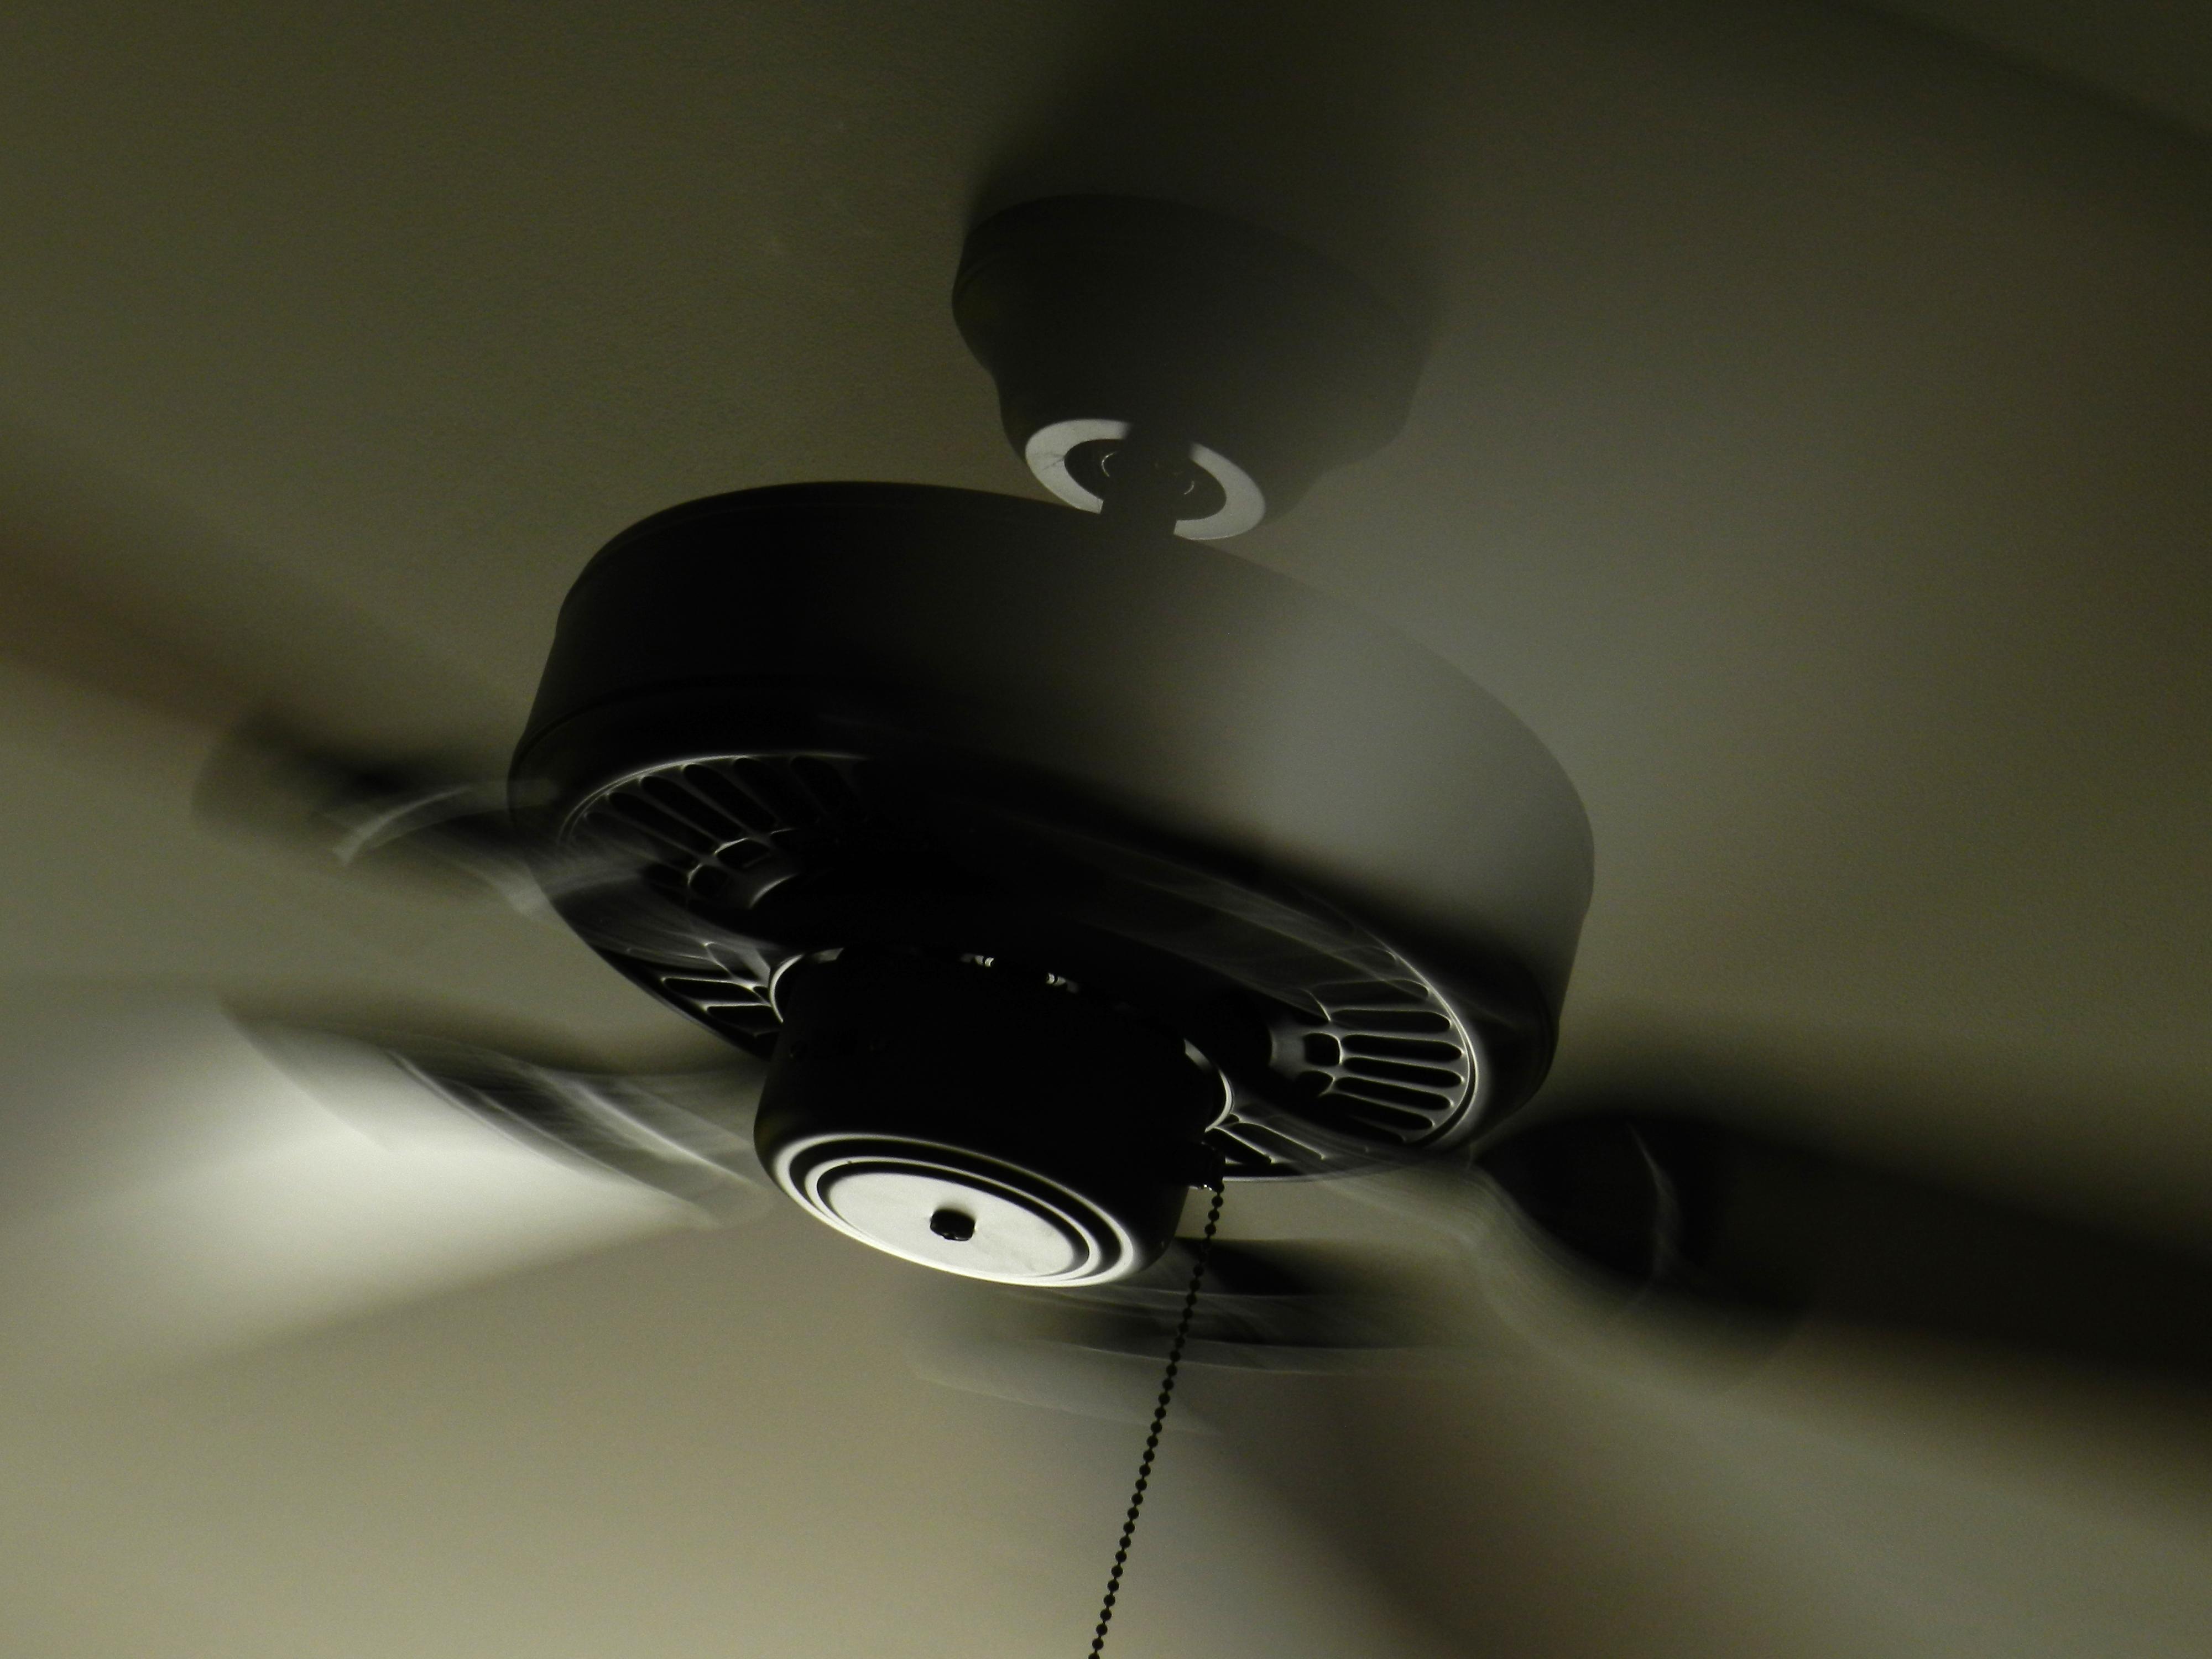 Tips to lower electricity bill during the summer